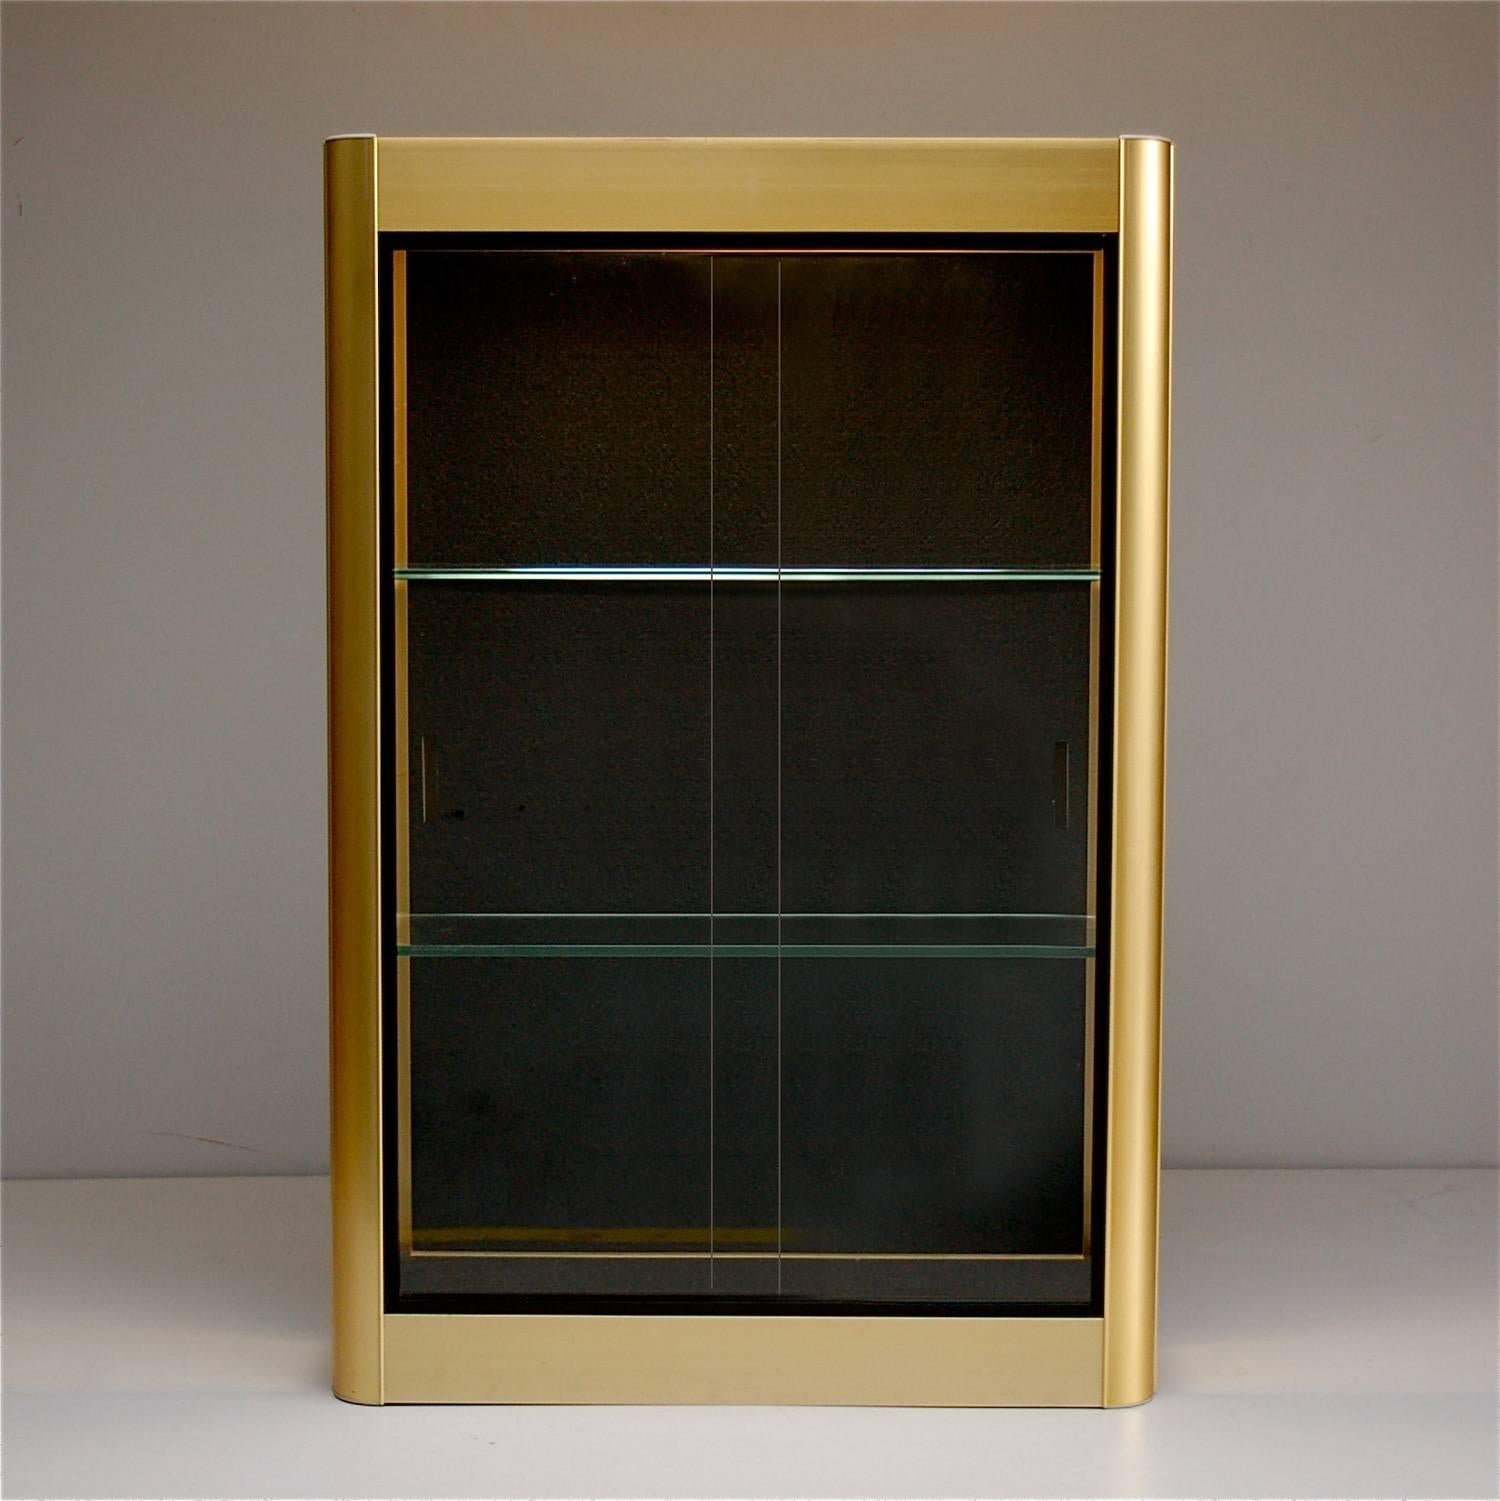 Gold colored aluminium display cabinet with sliding glass doors and round edges. It has built in tube light which helps create a great backdrop for displaying any collectibles or jewelry. It could also function as an apothecary or bathroom cabinet.